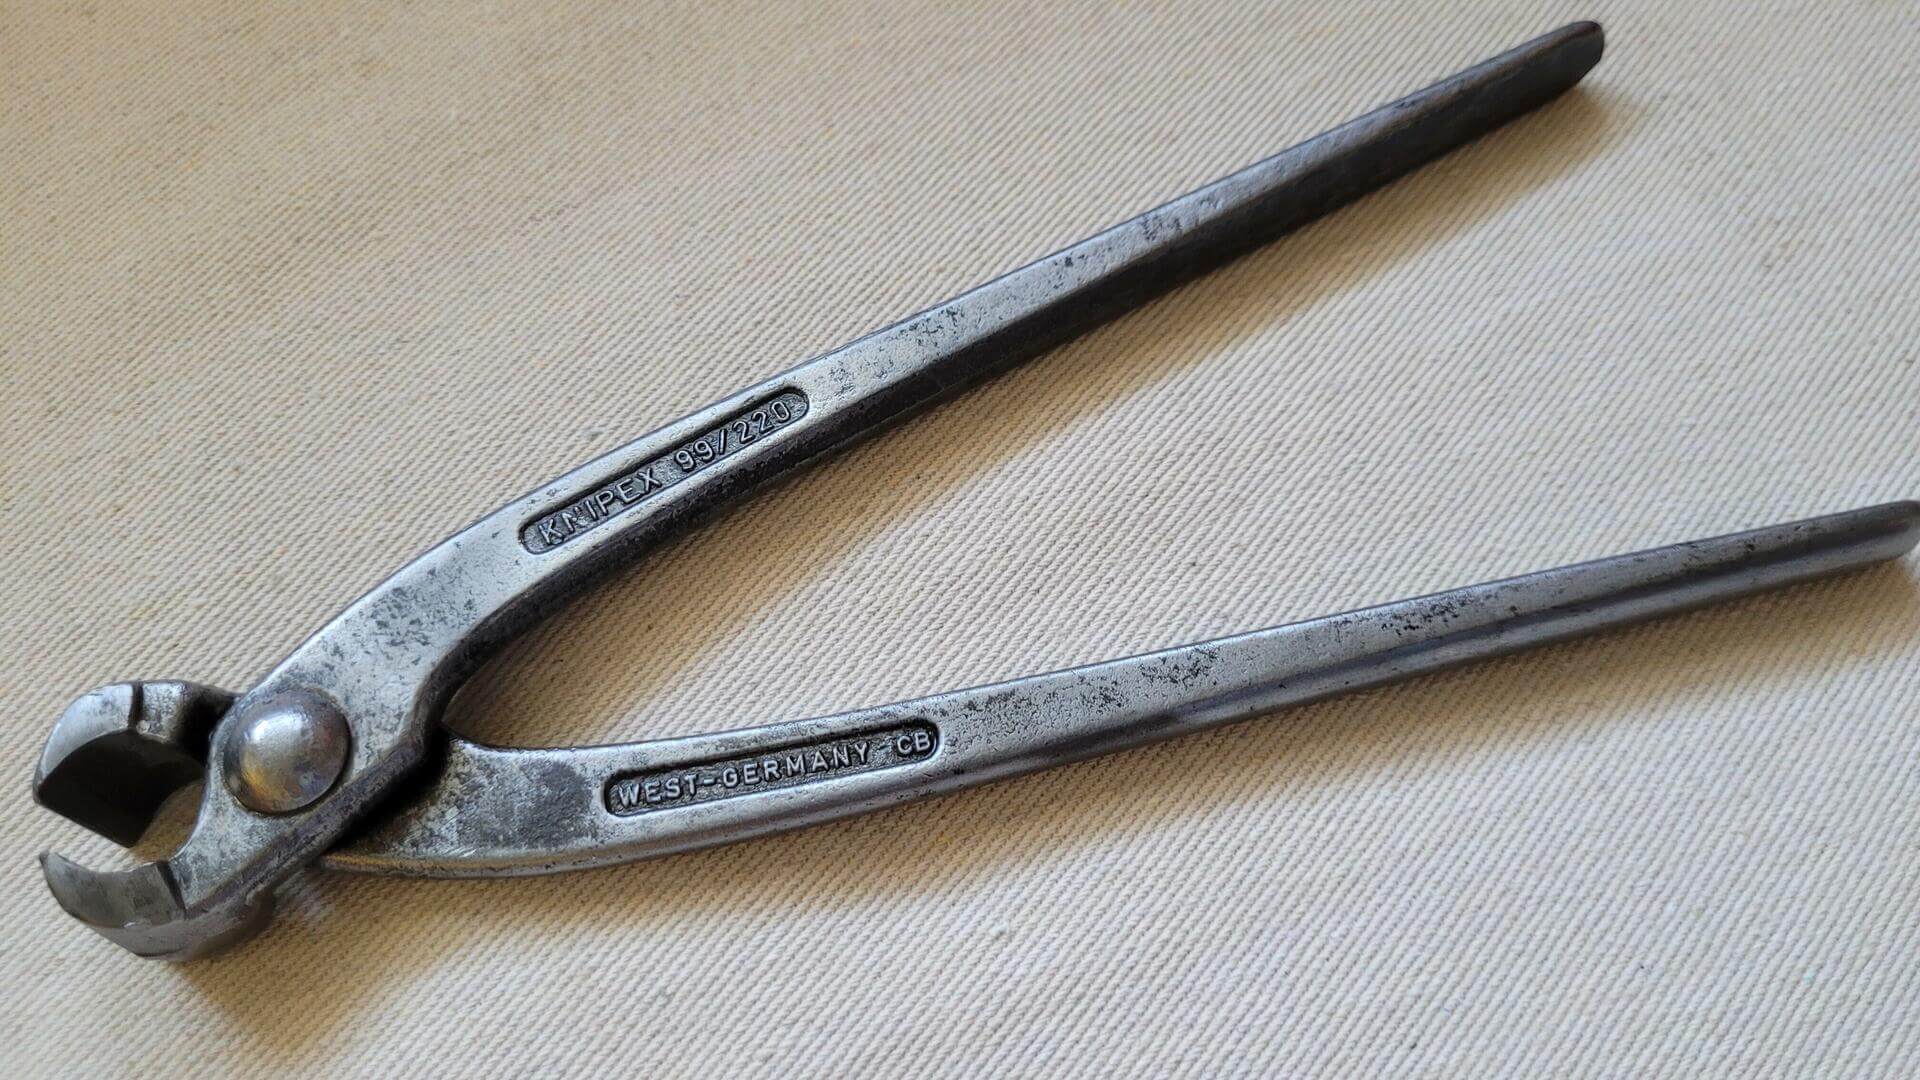 Rare Knipex 99-220 End Cutting Nipper Nail Puller Pliers Western Germany - Collectible Mid Century Modern MCM Industrial Design Cutting Hand Tools